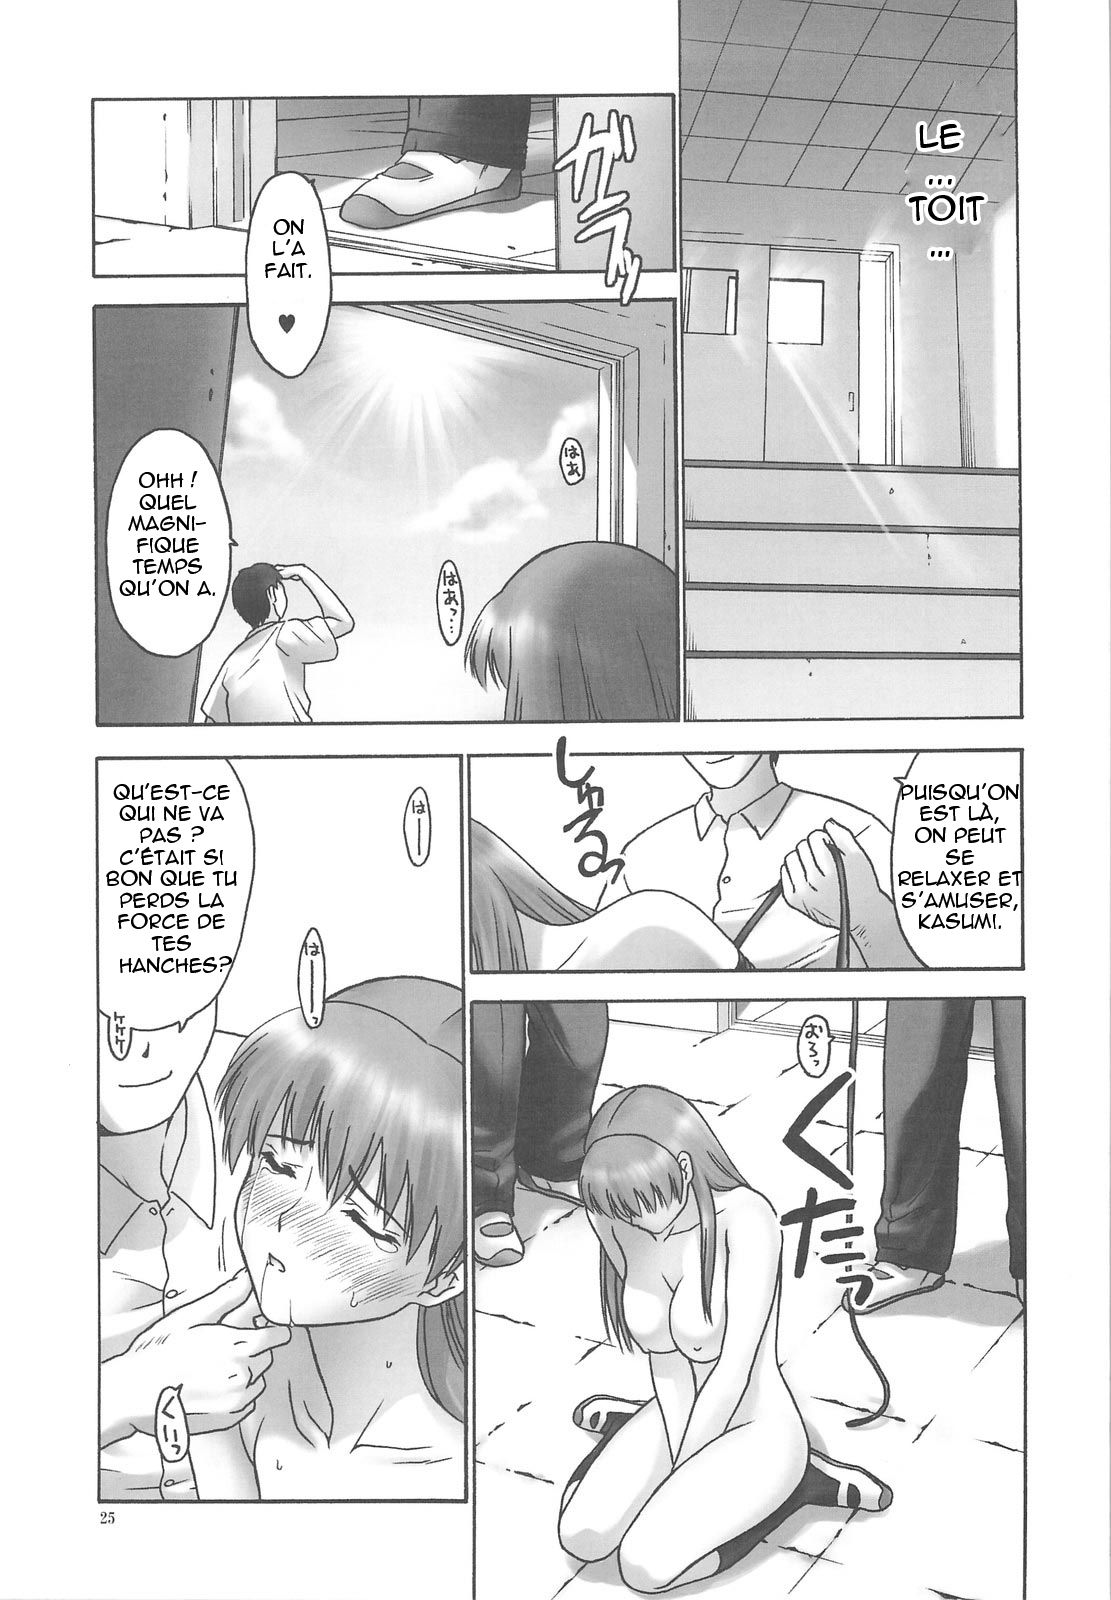 REI - slave to the grind - REI 06: CHAPTER 05 numero d'image 23